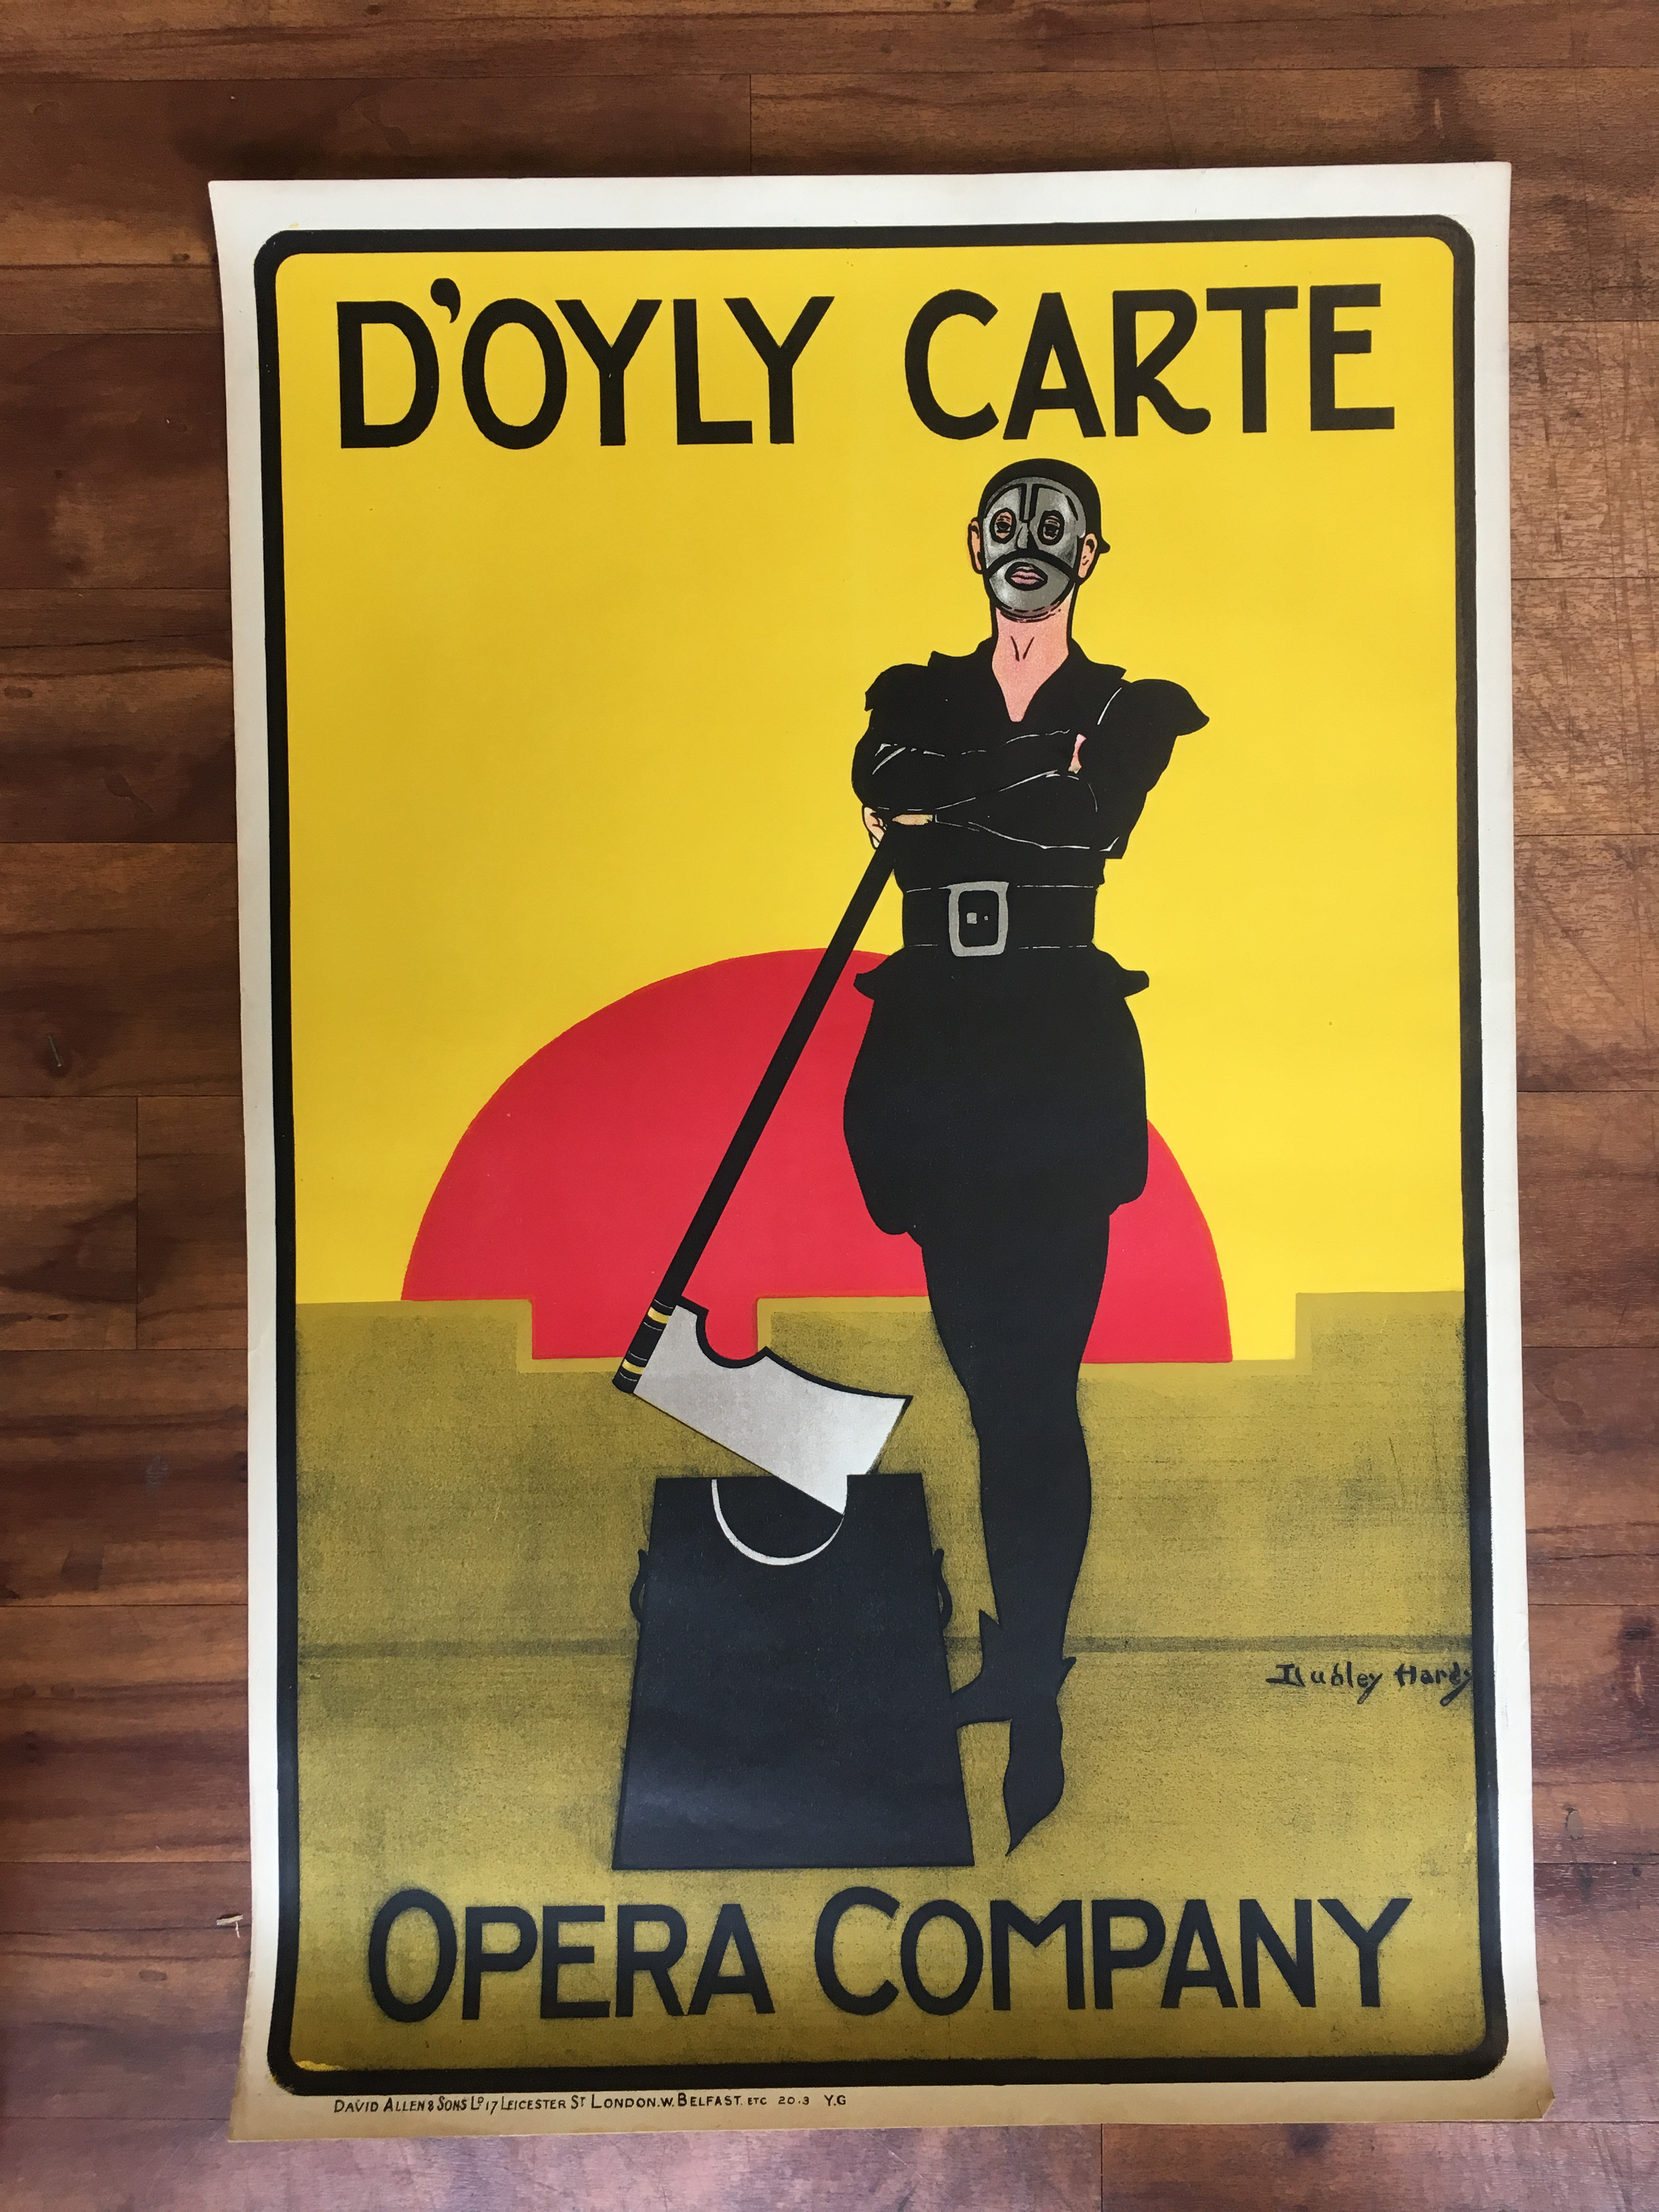 Dudley Hardy, DOYLY CARTE OPERA COMPANY, lithograph, circa 1919, published by David Allen & Sons